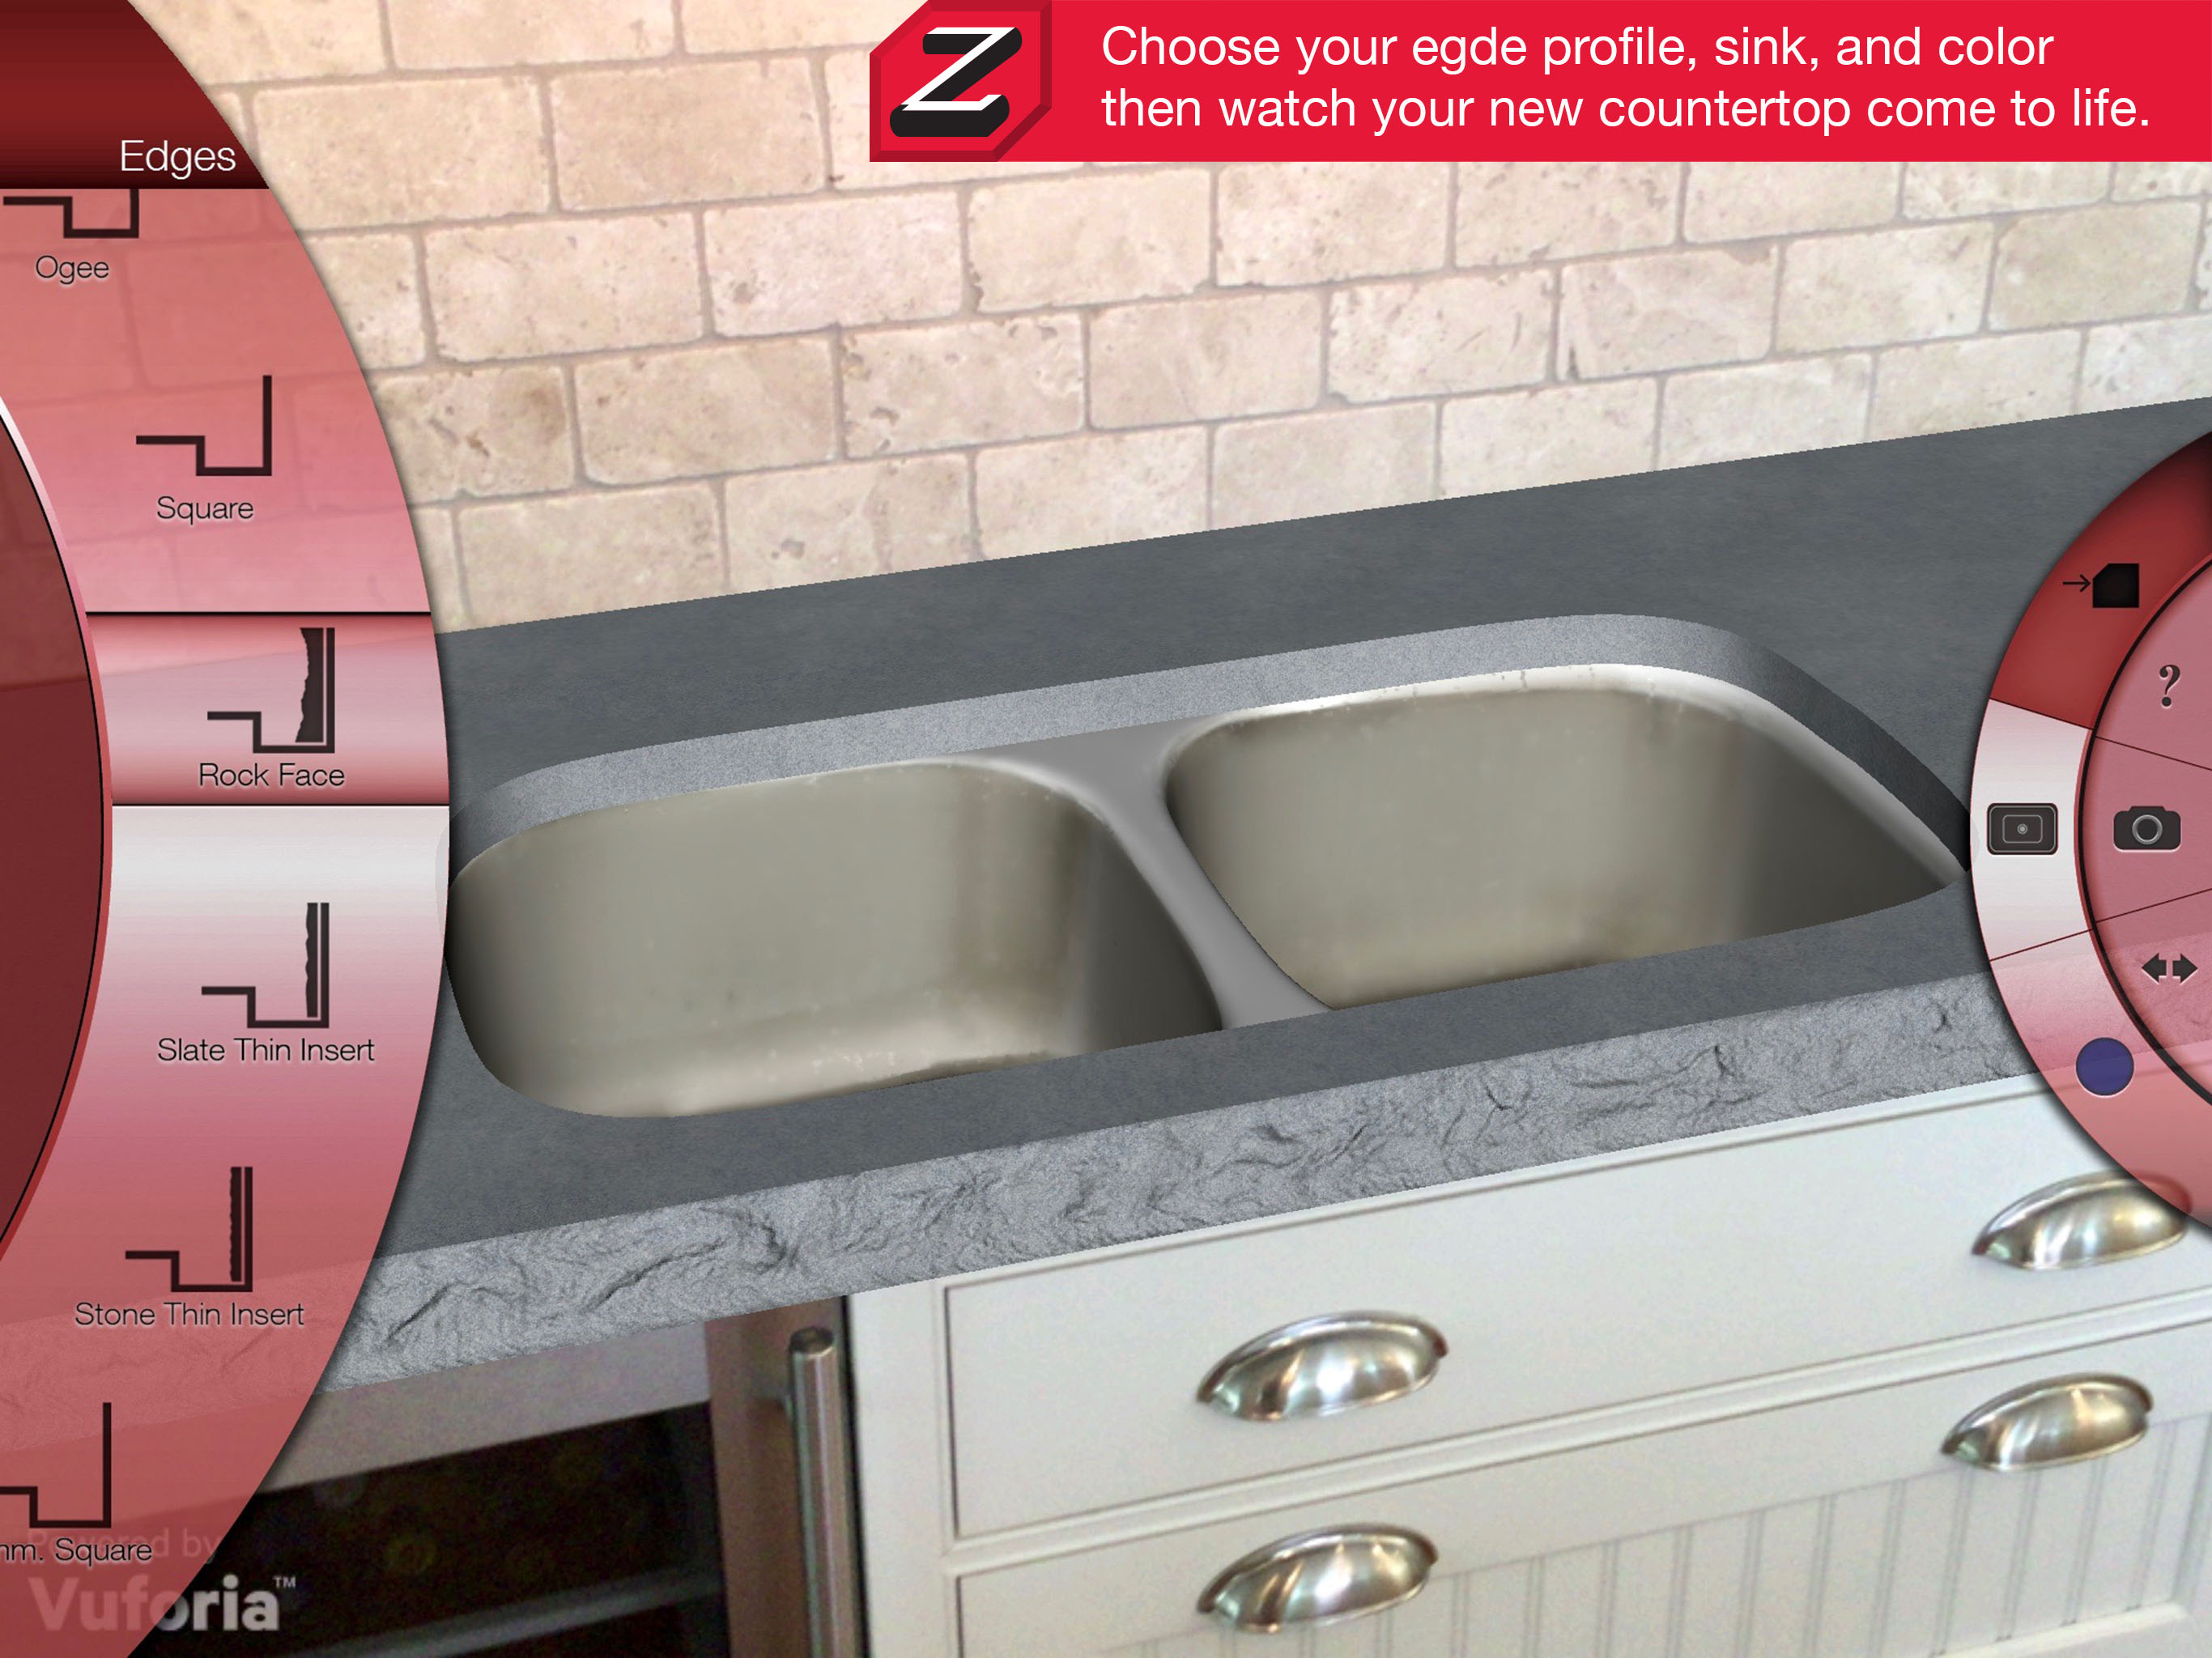 Concrete Countertop Solutions Inc creators of Z Counterforms, announced the release of their new iPad and Android Tablet app - Z Counterform Visualizer. 